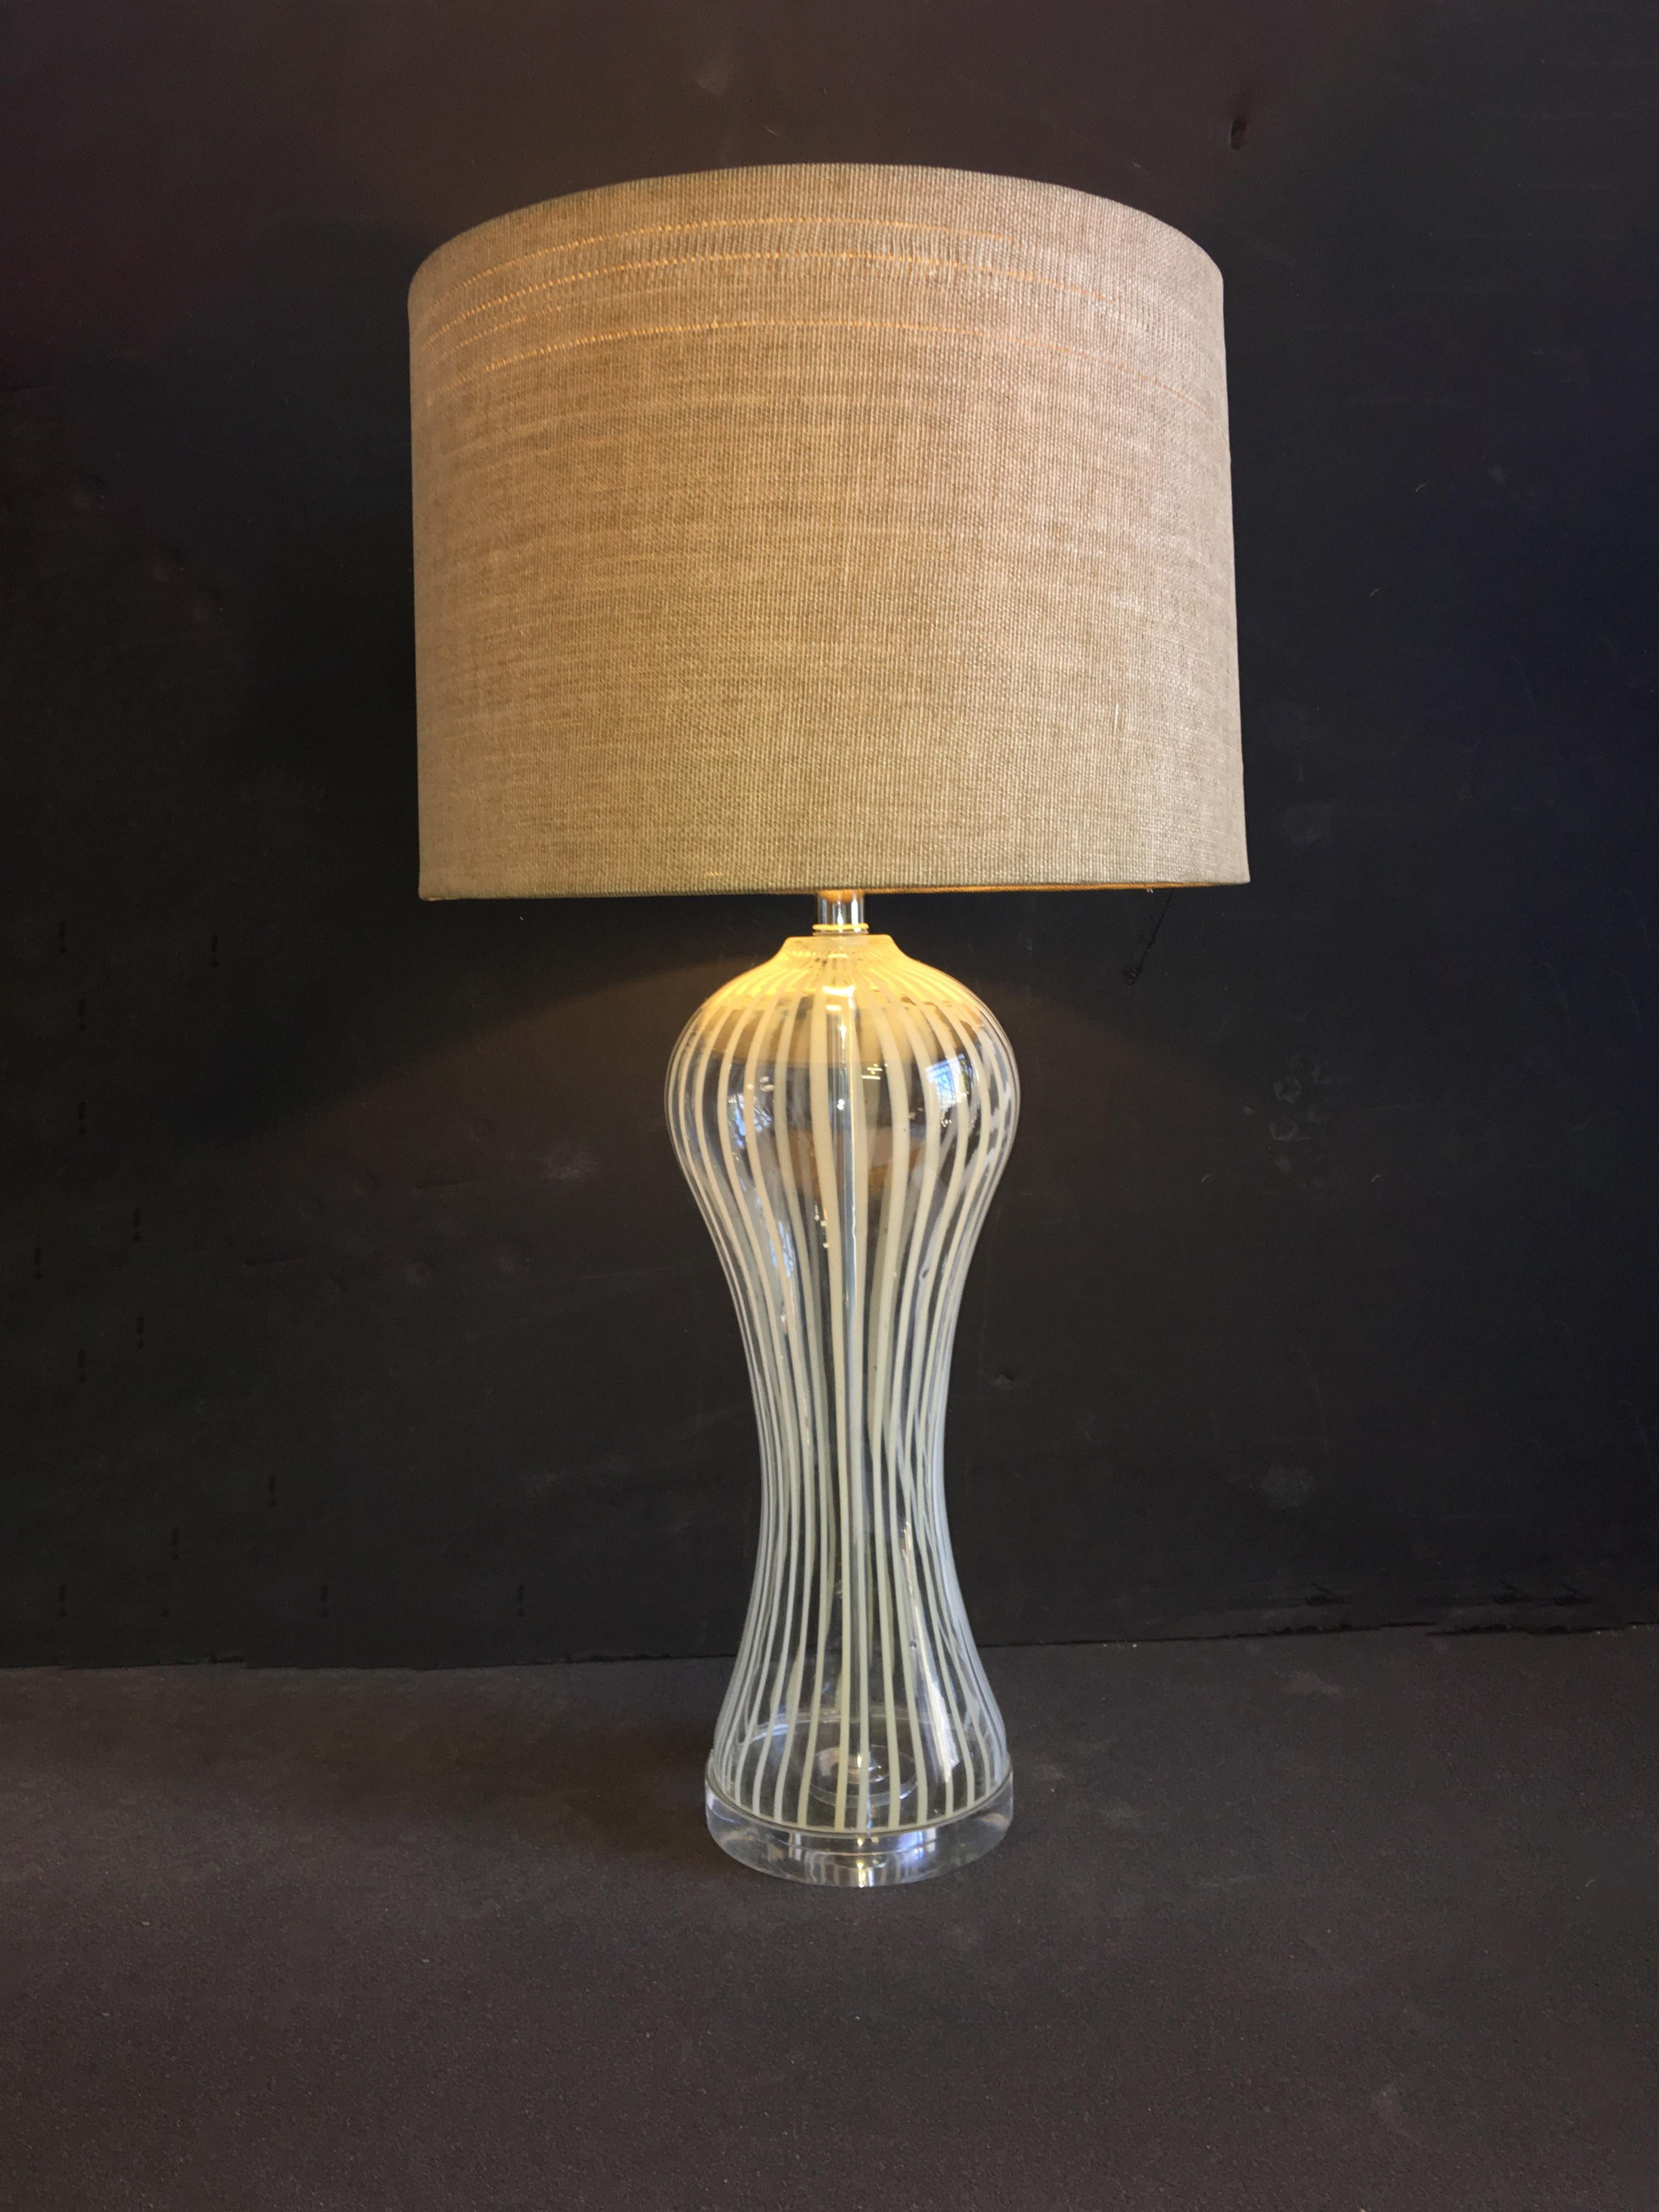 An exuberant, glass lamp fashioned into a curvy, hourglass shape and designed.
w/o lampshade: 7.5